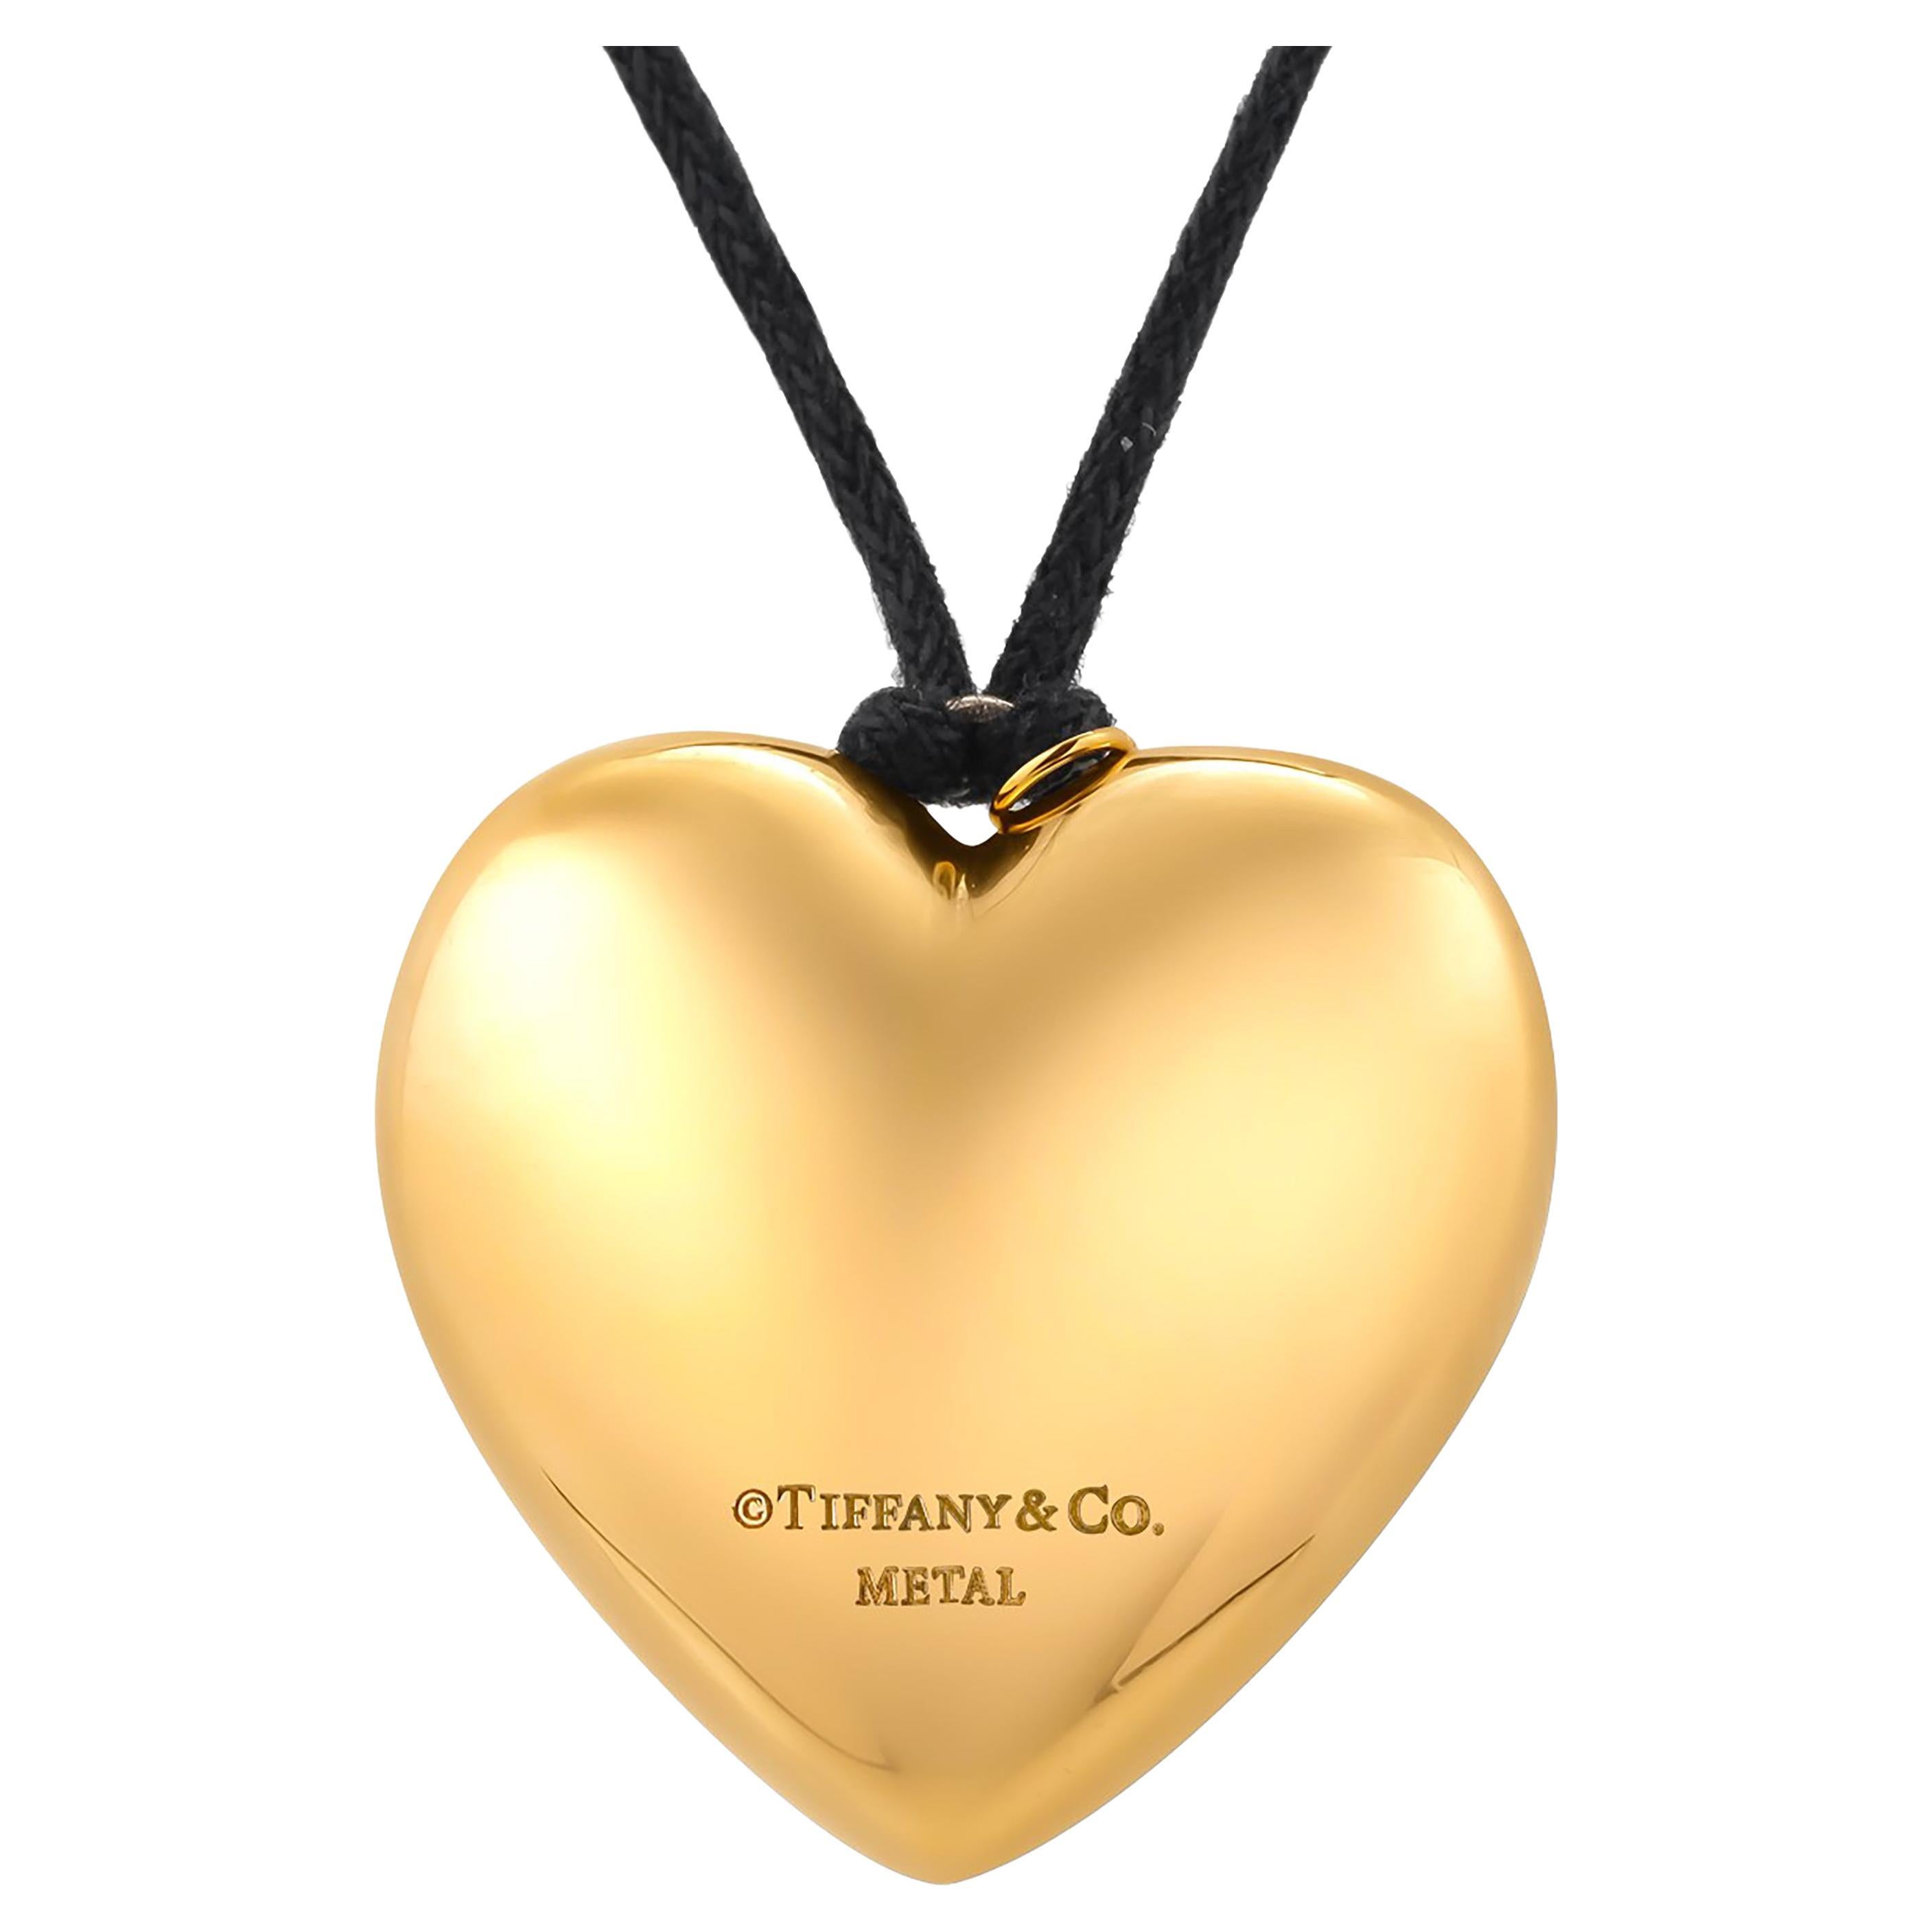 Rare Tiffany Co Heart Shaped Mixture Gold Silver Metal One Inch Wide Necklace 